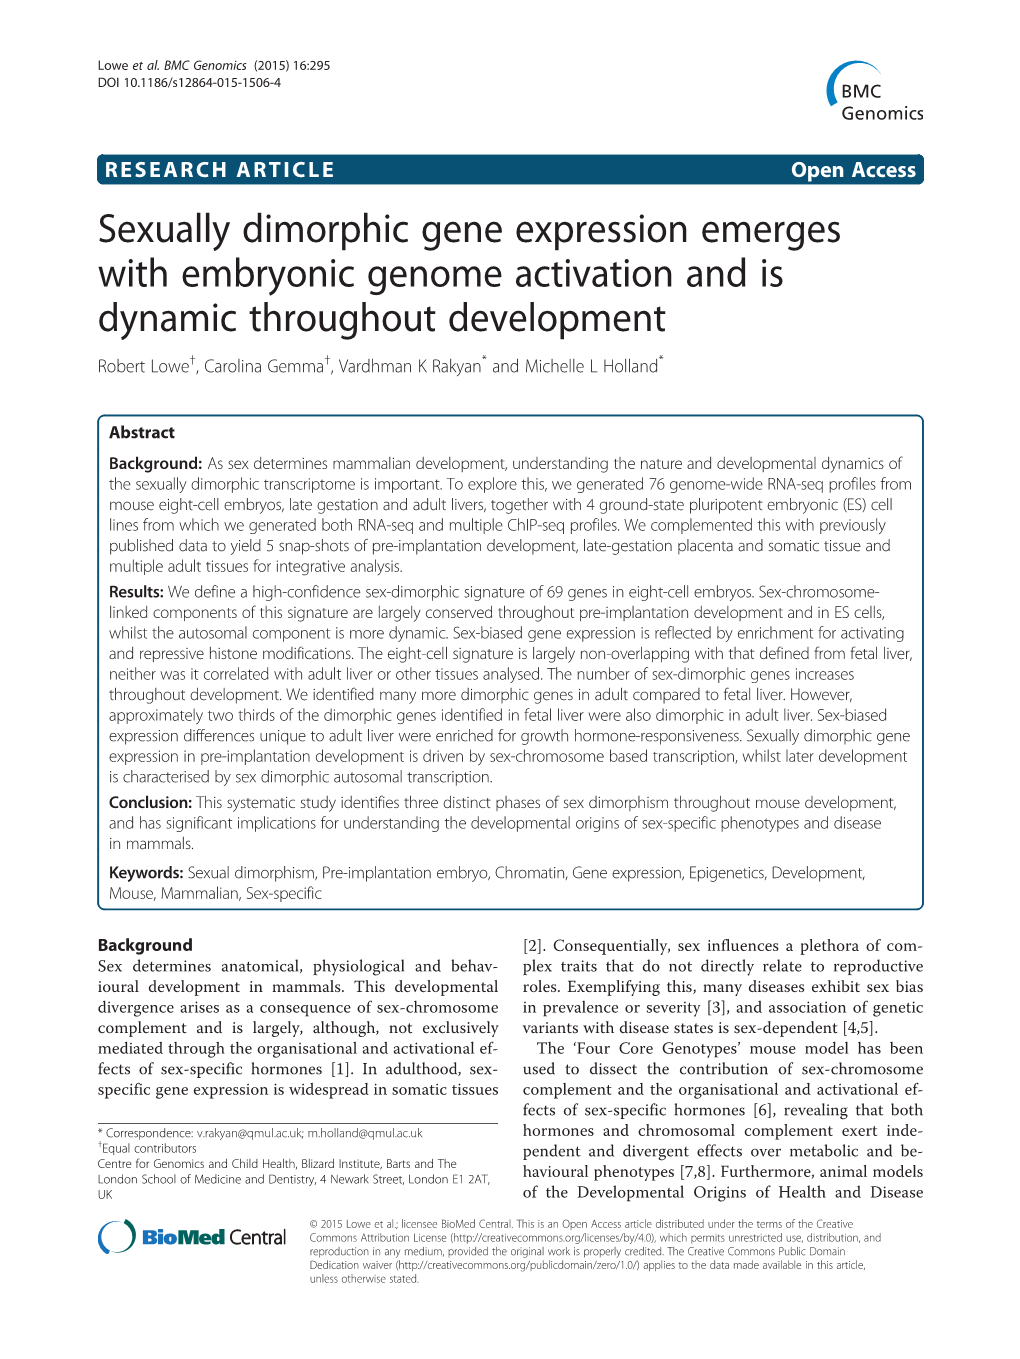 Sexually Dimorphic Gene Expression Emerges with Embryonic Genome